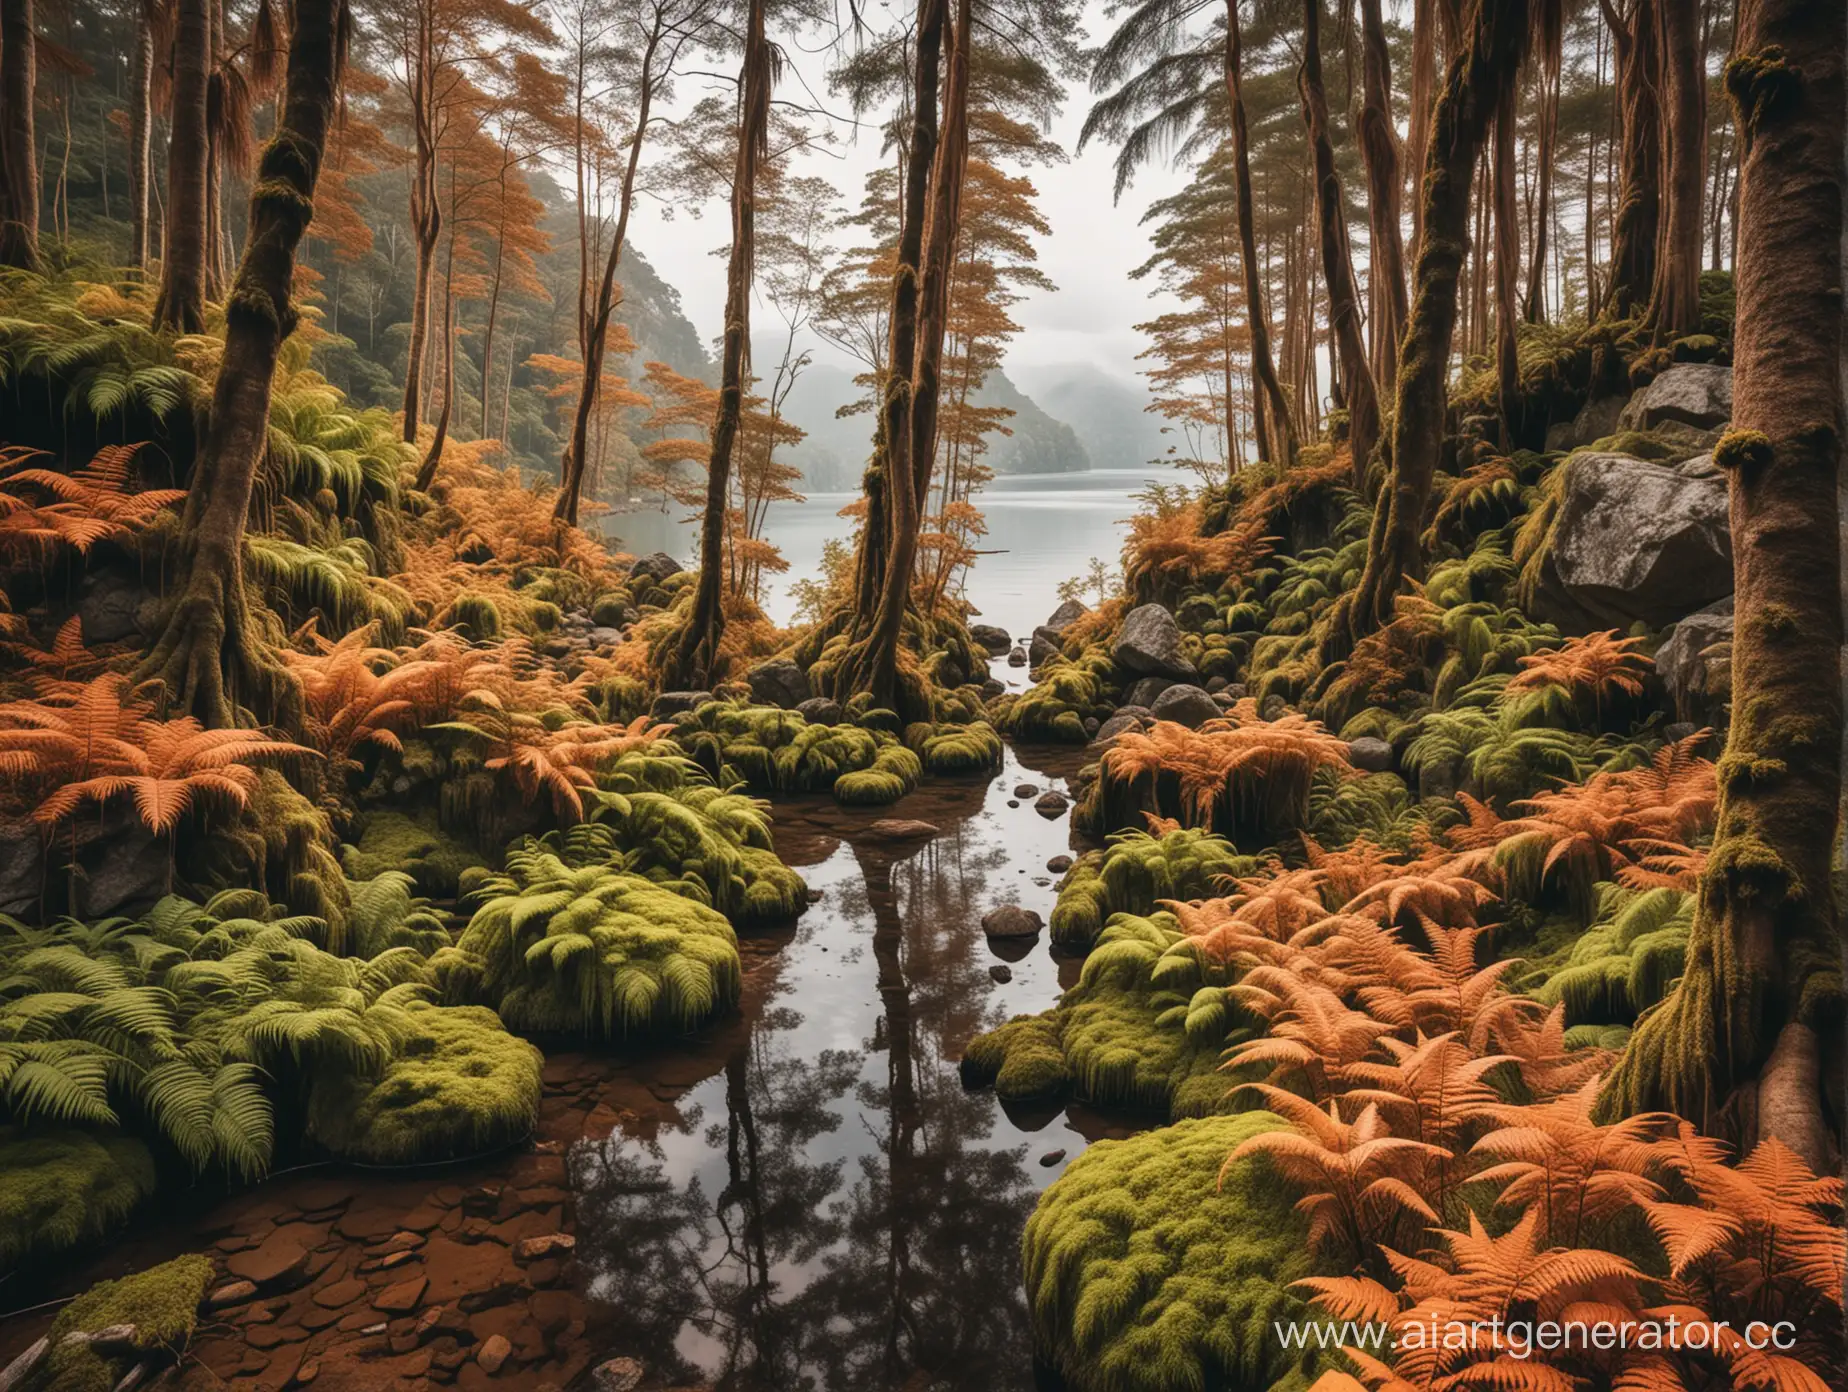 Majestic-Fern-Trees-and-Lakeside-Serenity-Aerial-View-of-Mossy-Rocks-and-Towering-Stones